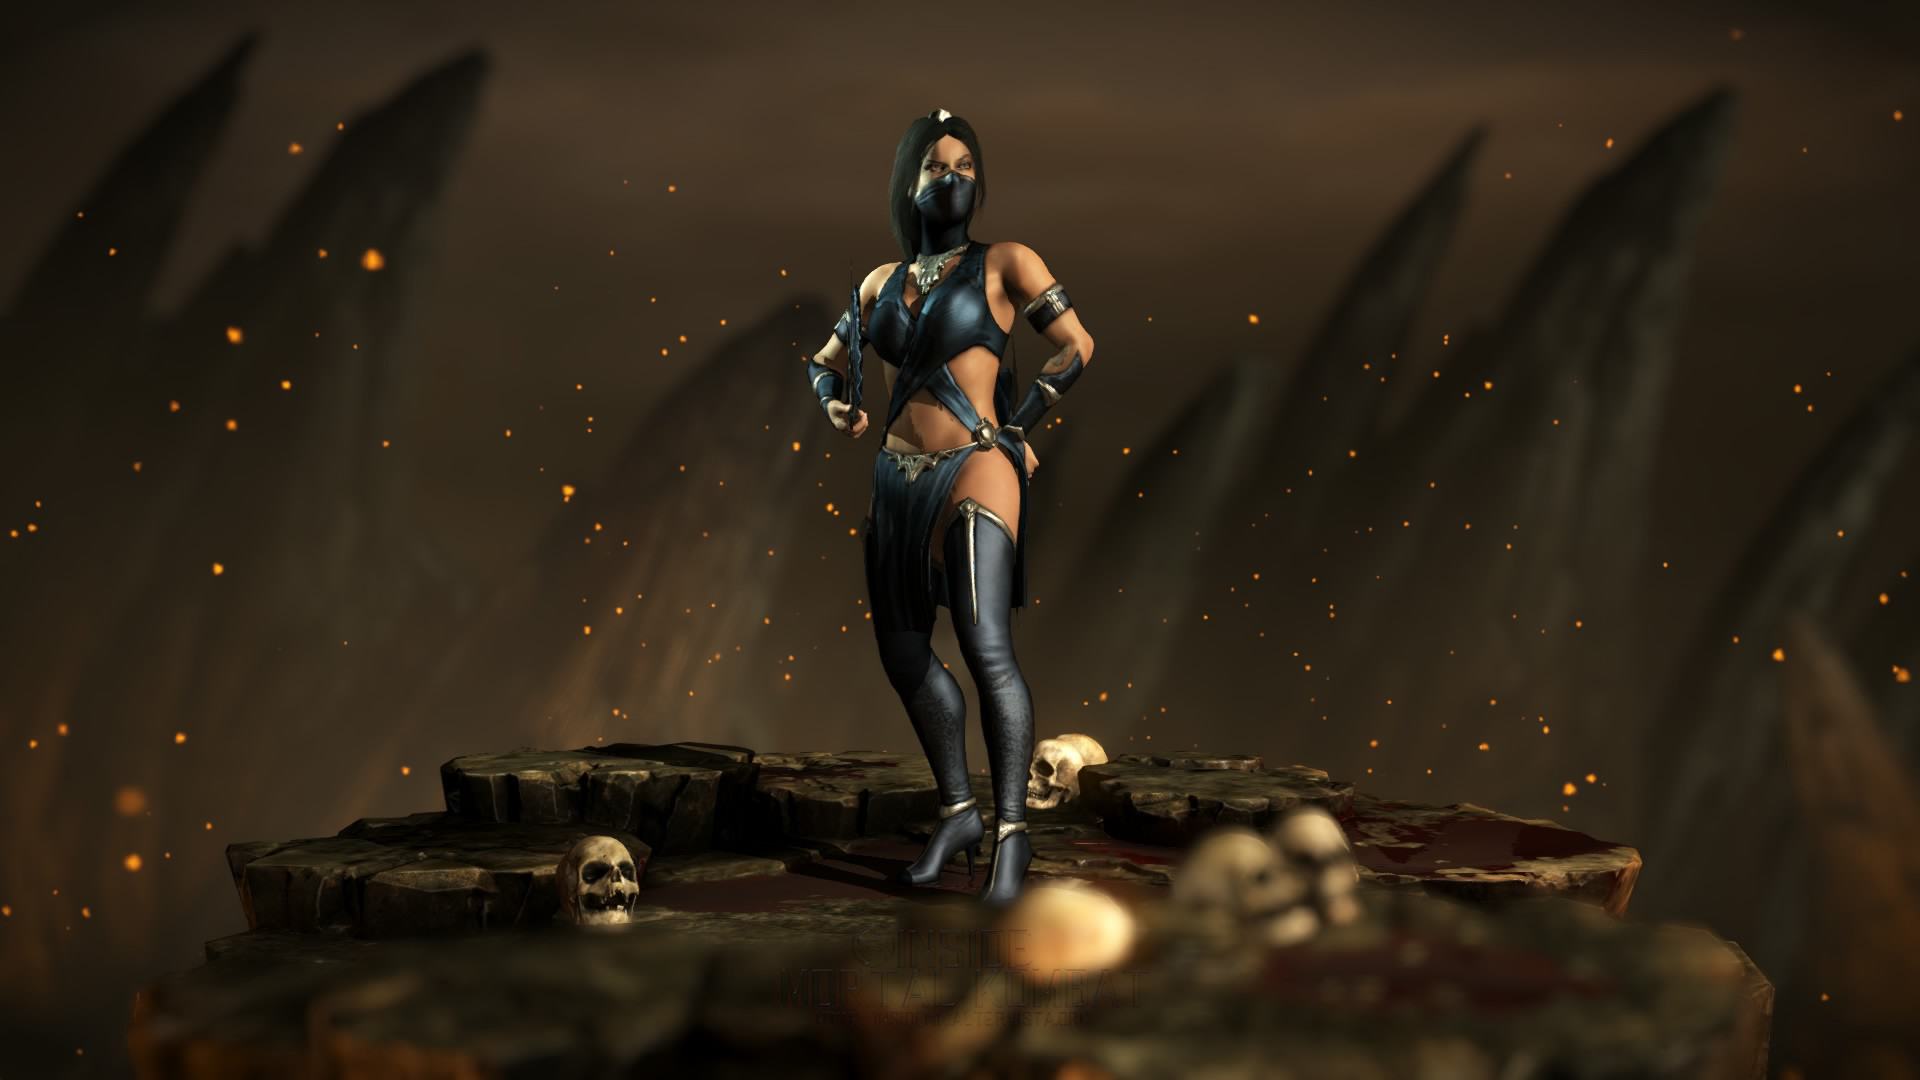 1920x1080 According to people on this board this is not a revealing outfit - Mortal  Kombat X Message Board for PlayStation 4 - GameFAQs